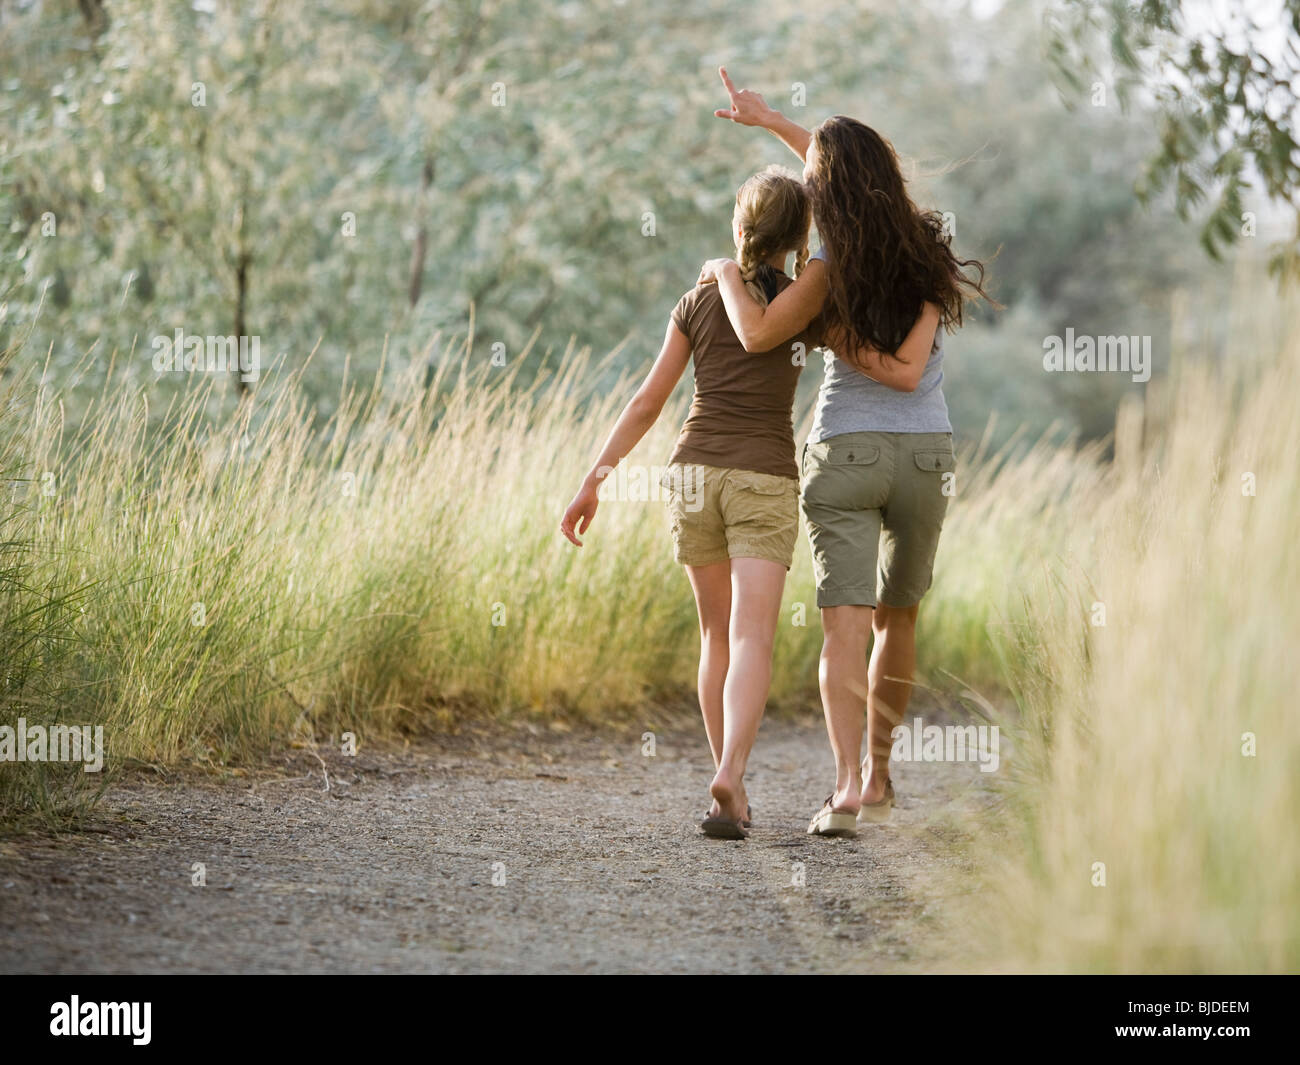 Two women on a nature walk. Stock Photo